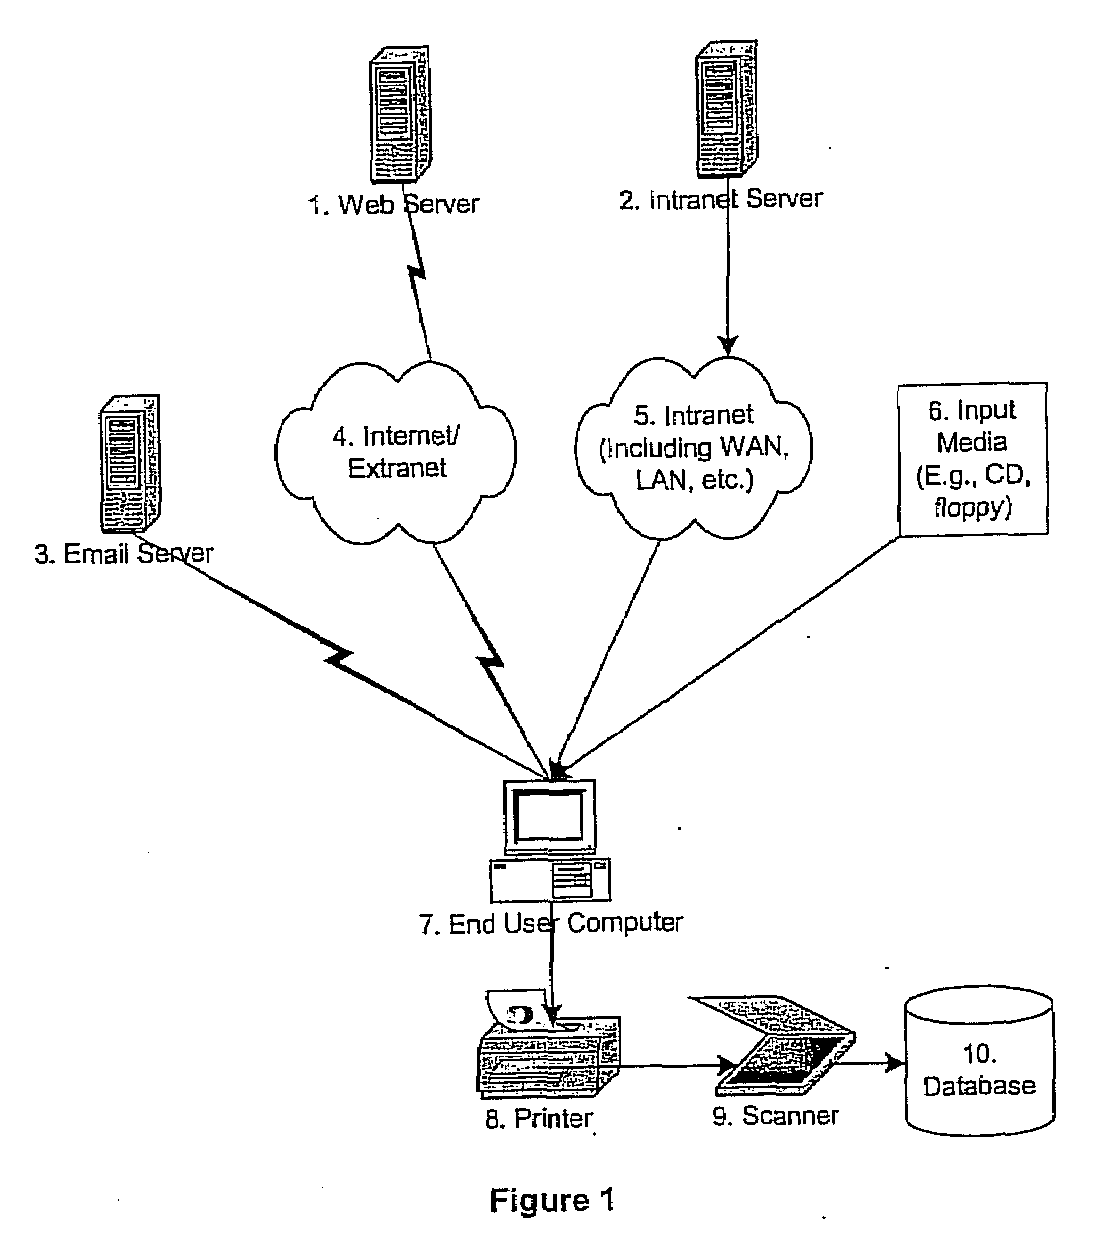 Method and system for increasing the accuracy and security of data capture from a paper form